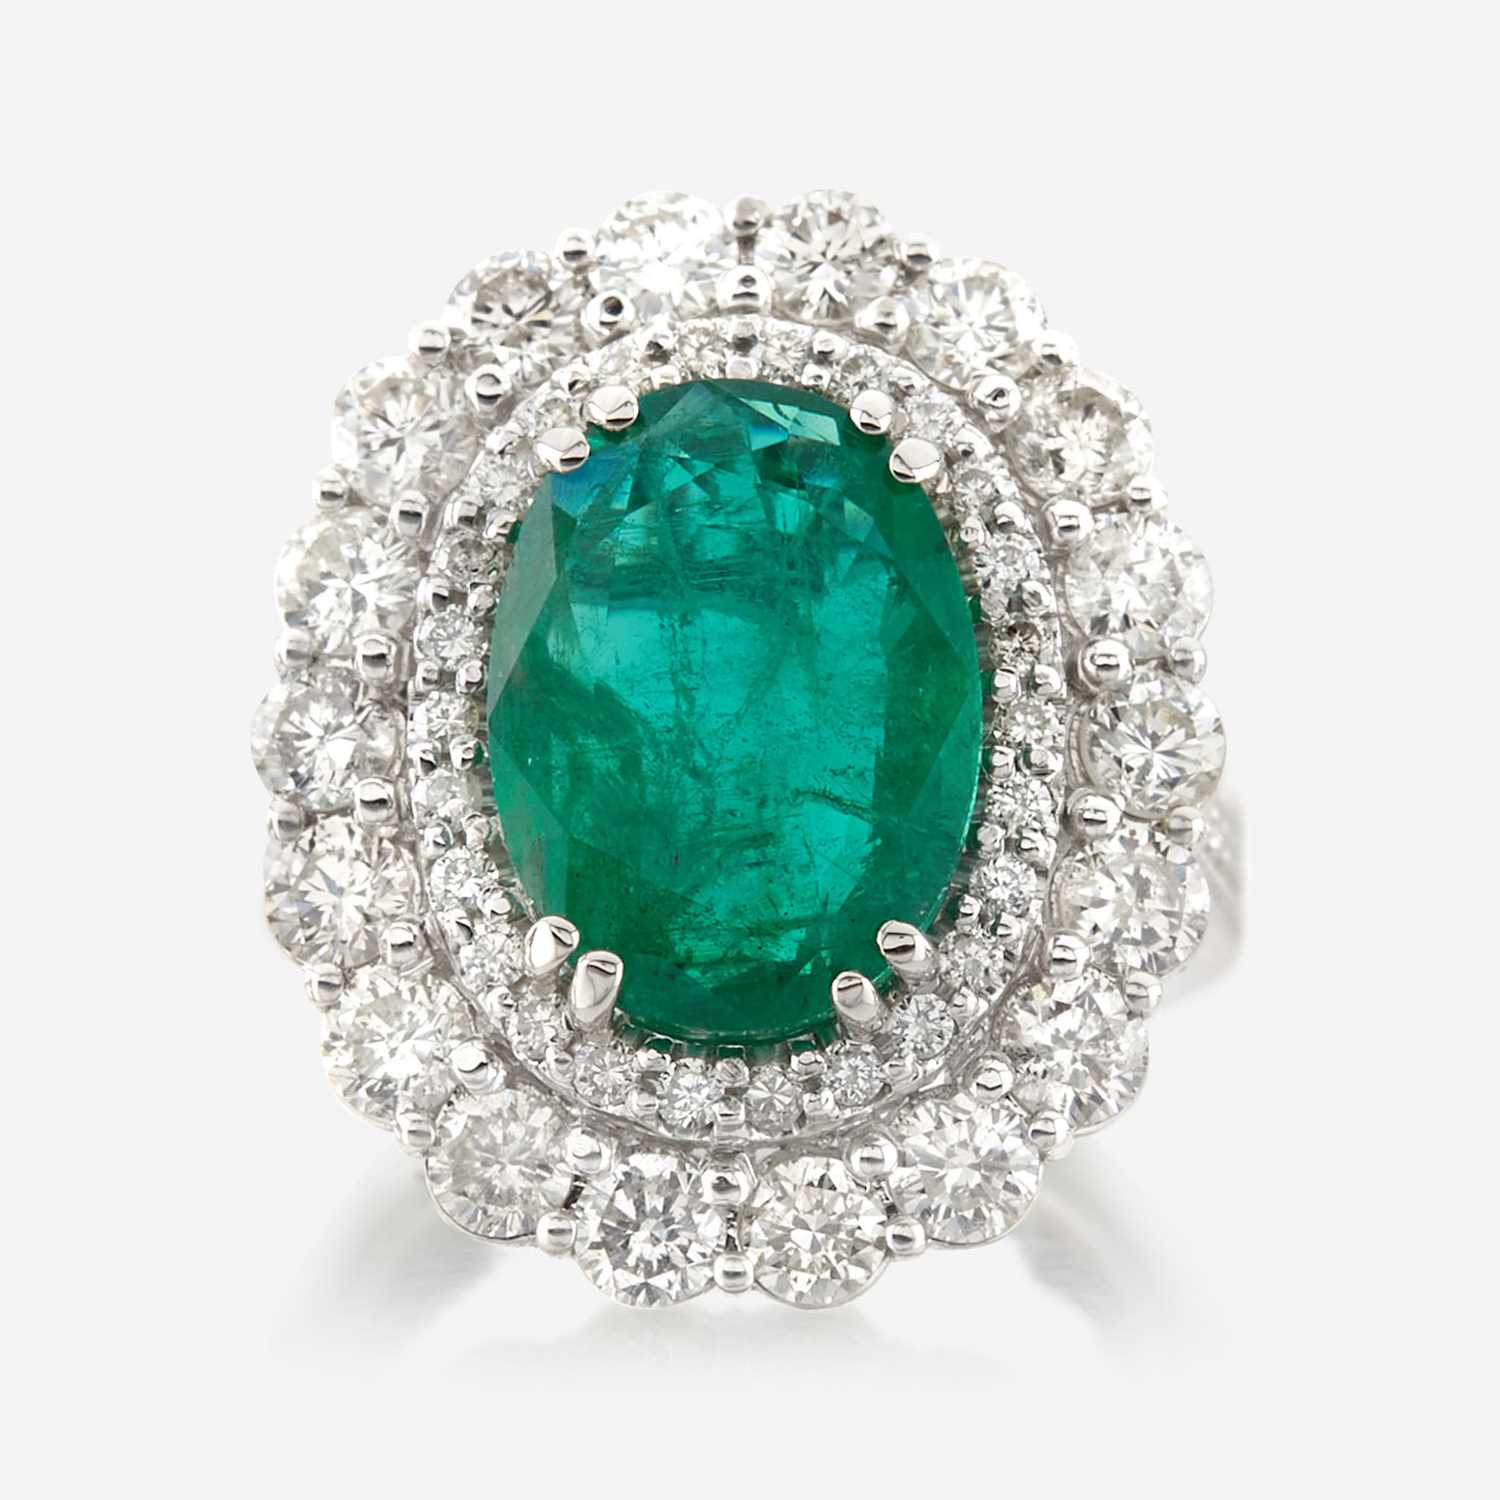 Lot 36 - An emerald, diamond, and white gold ring